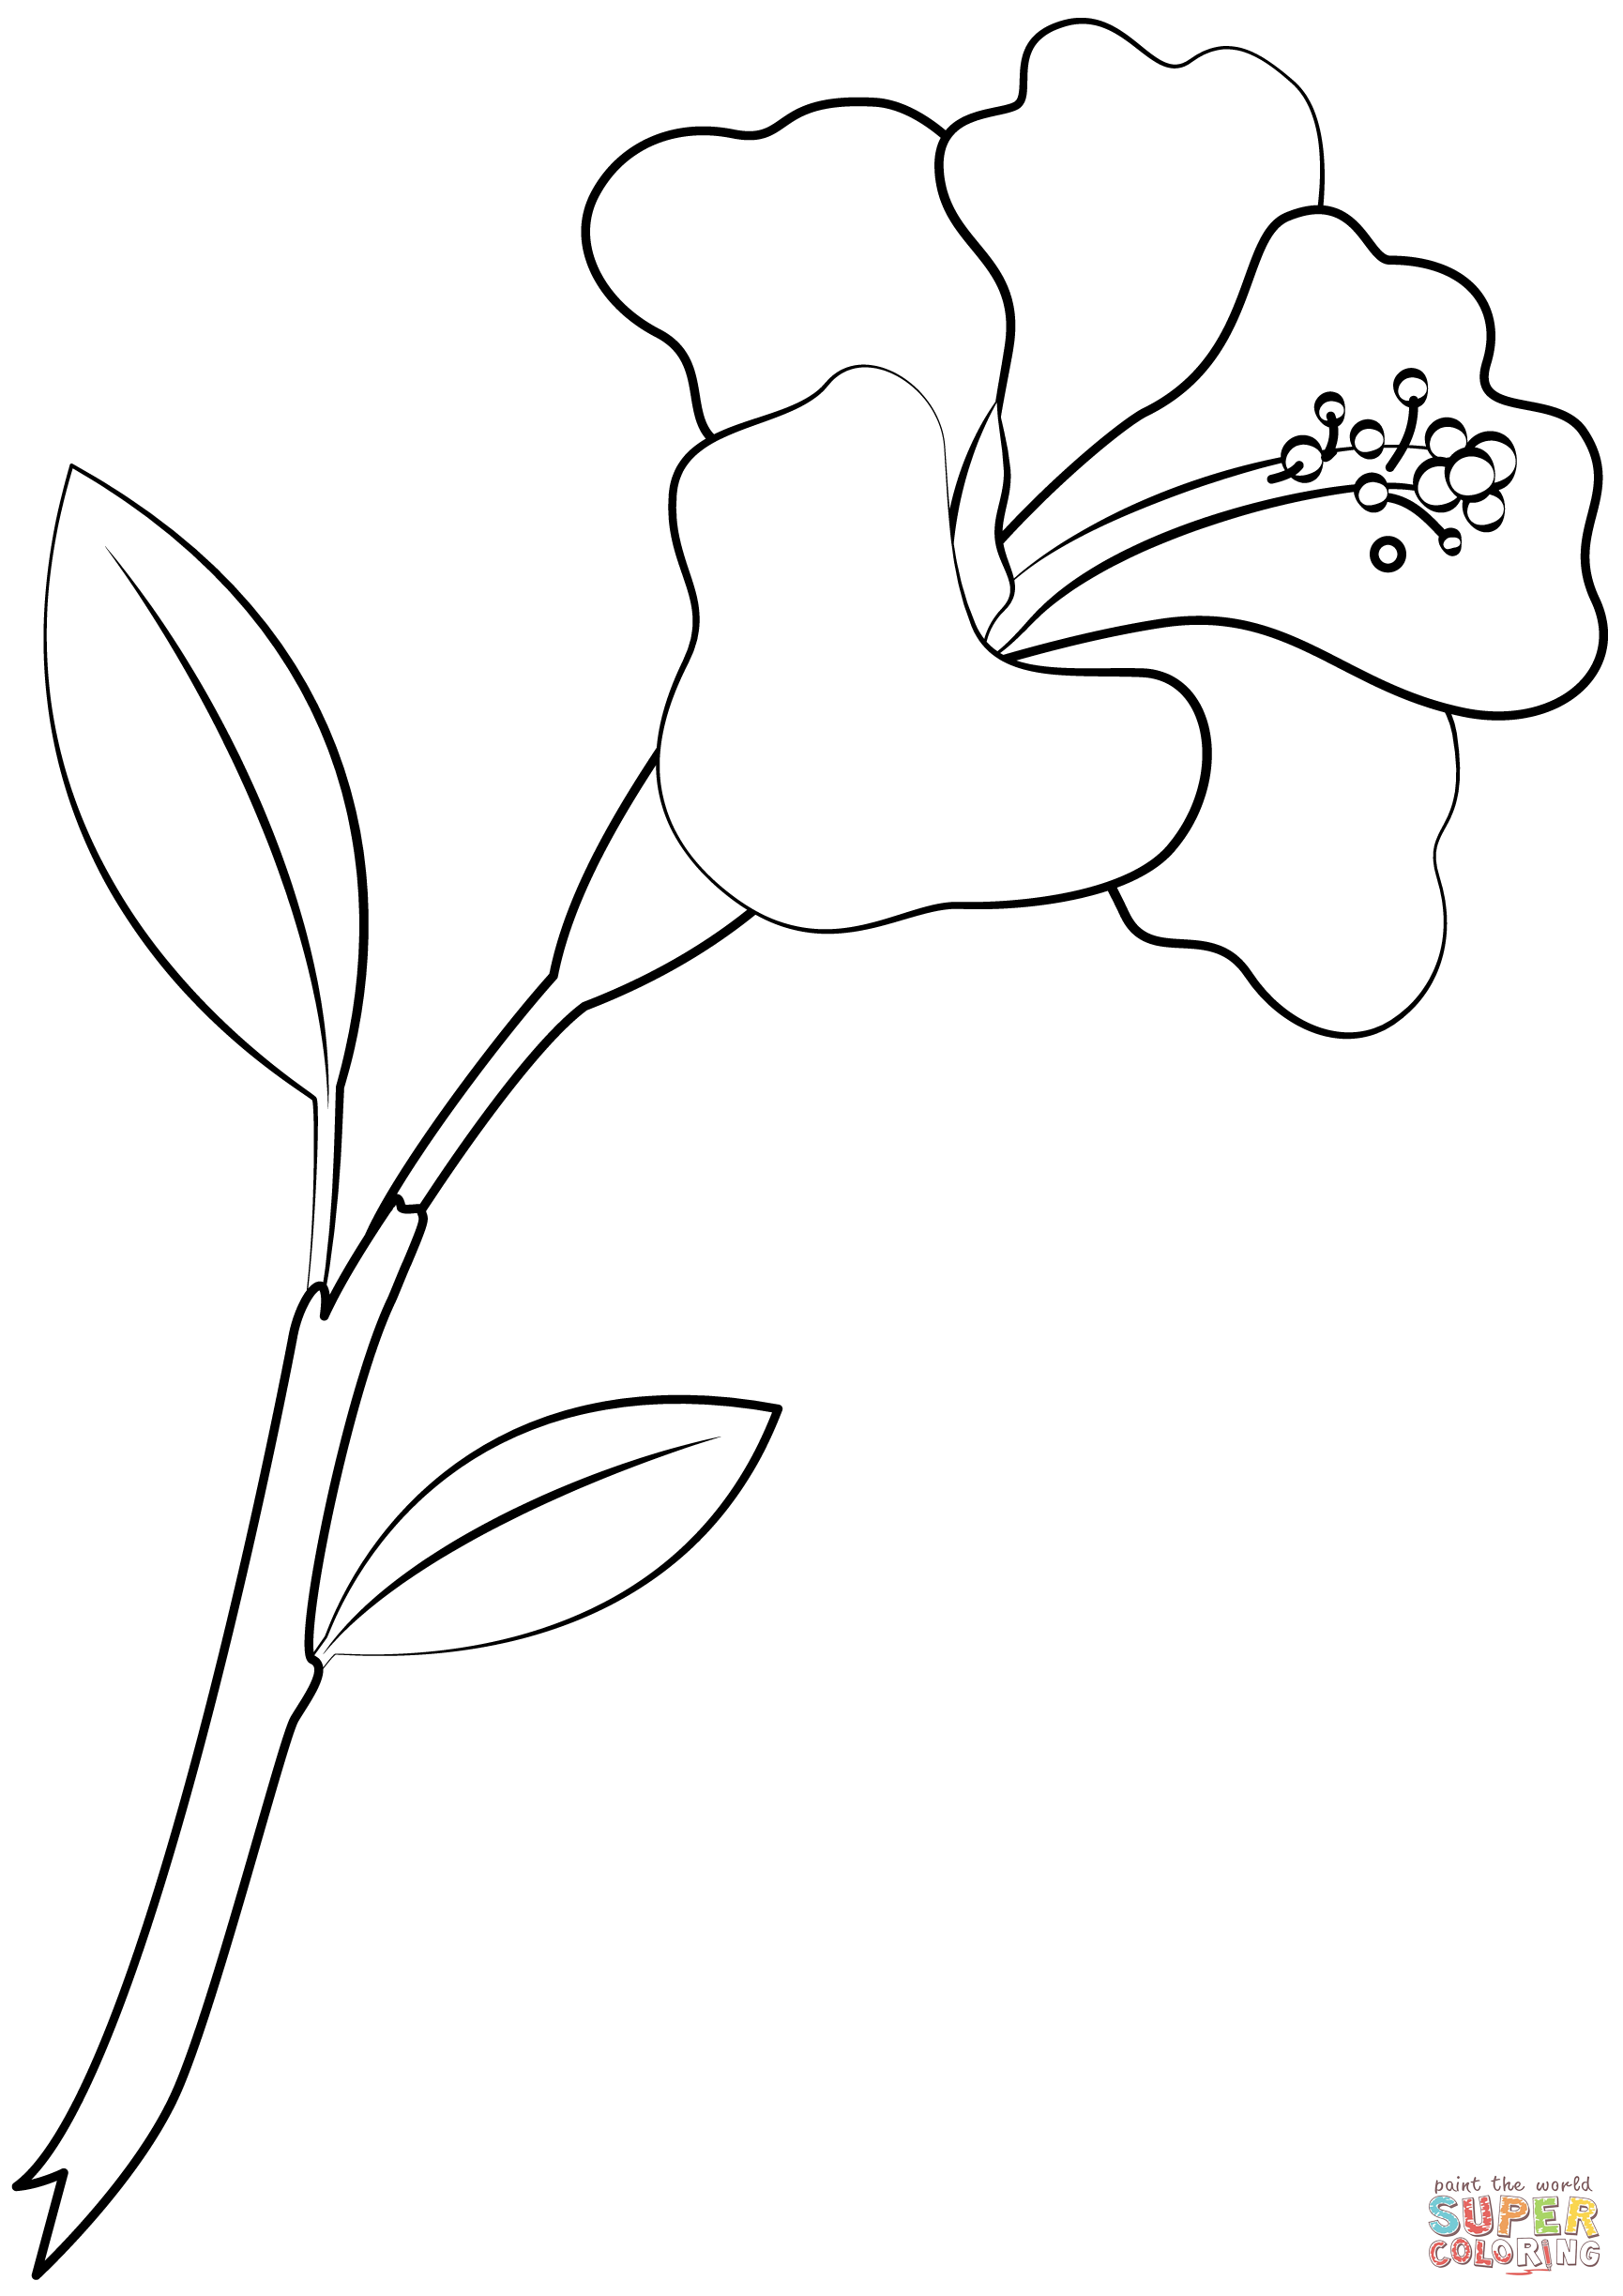 Hibiscus flower coloring page free printable coloring pages